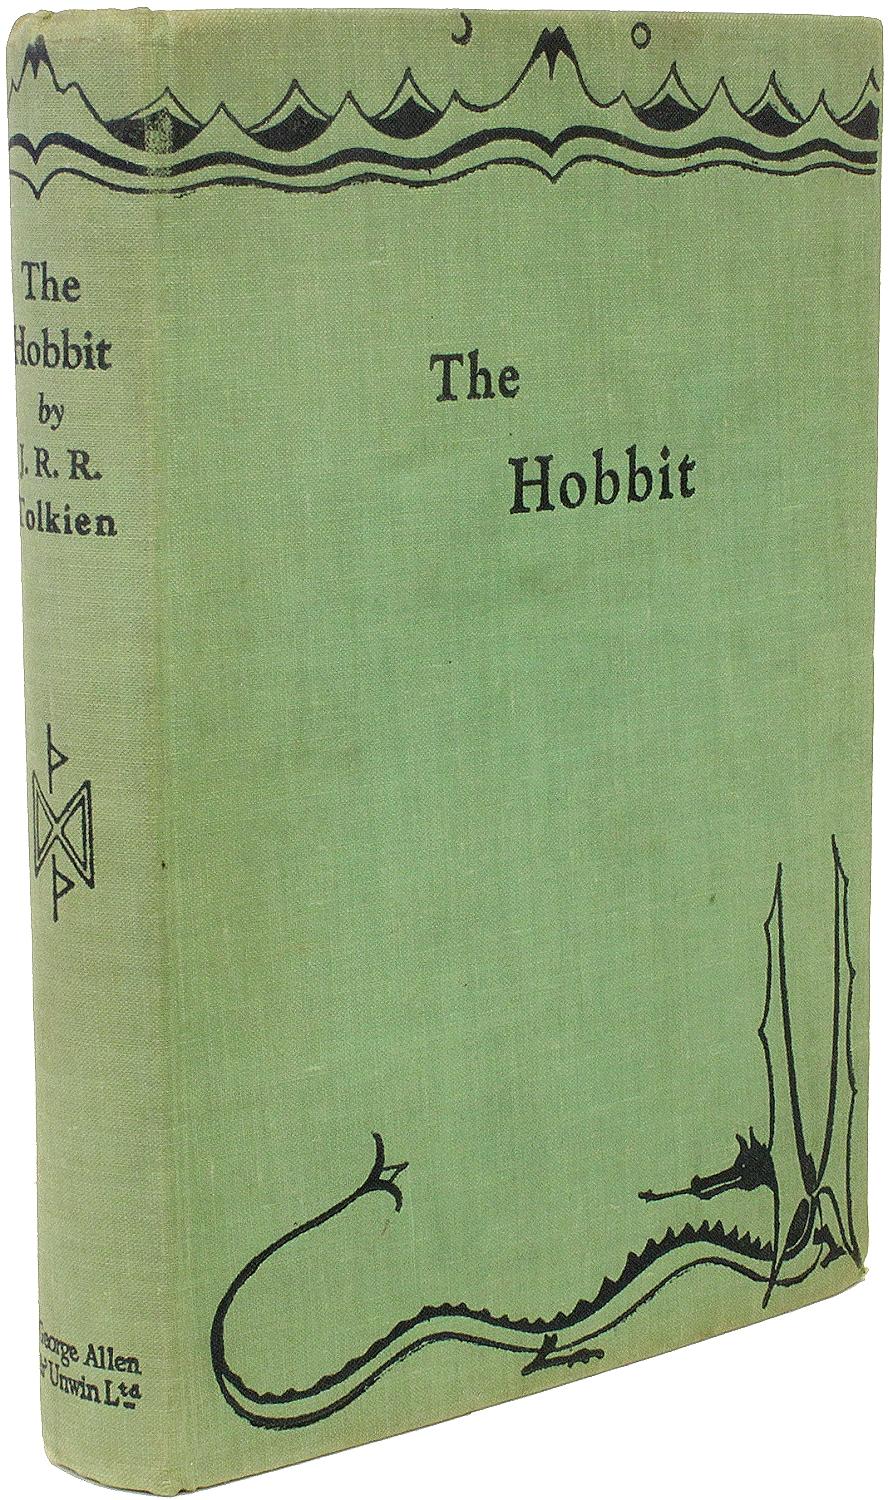 AUTHOR: TOLKIEN, J. R. R. 

TITLE: The Hobbit or There and Back Again.

PUBLISHER: London: George Allen & Unwin Ltd, 1937.

DESCRIPTION: FIRST EDITION FIRST PRINTING. 1 vol., 7-11/16